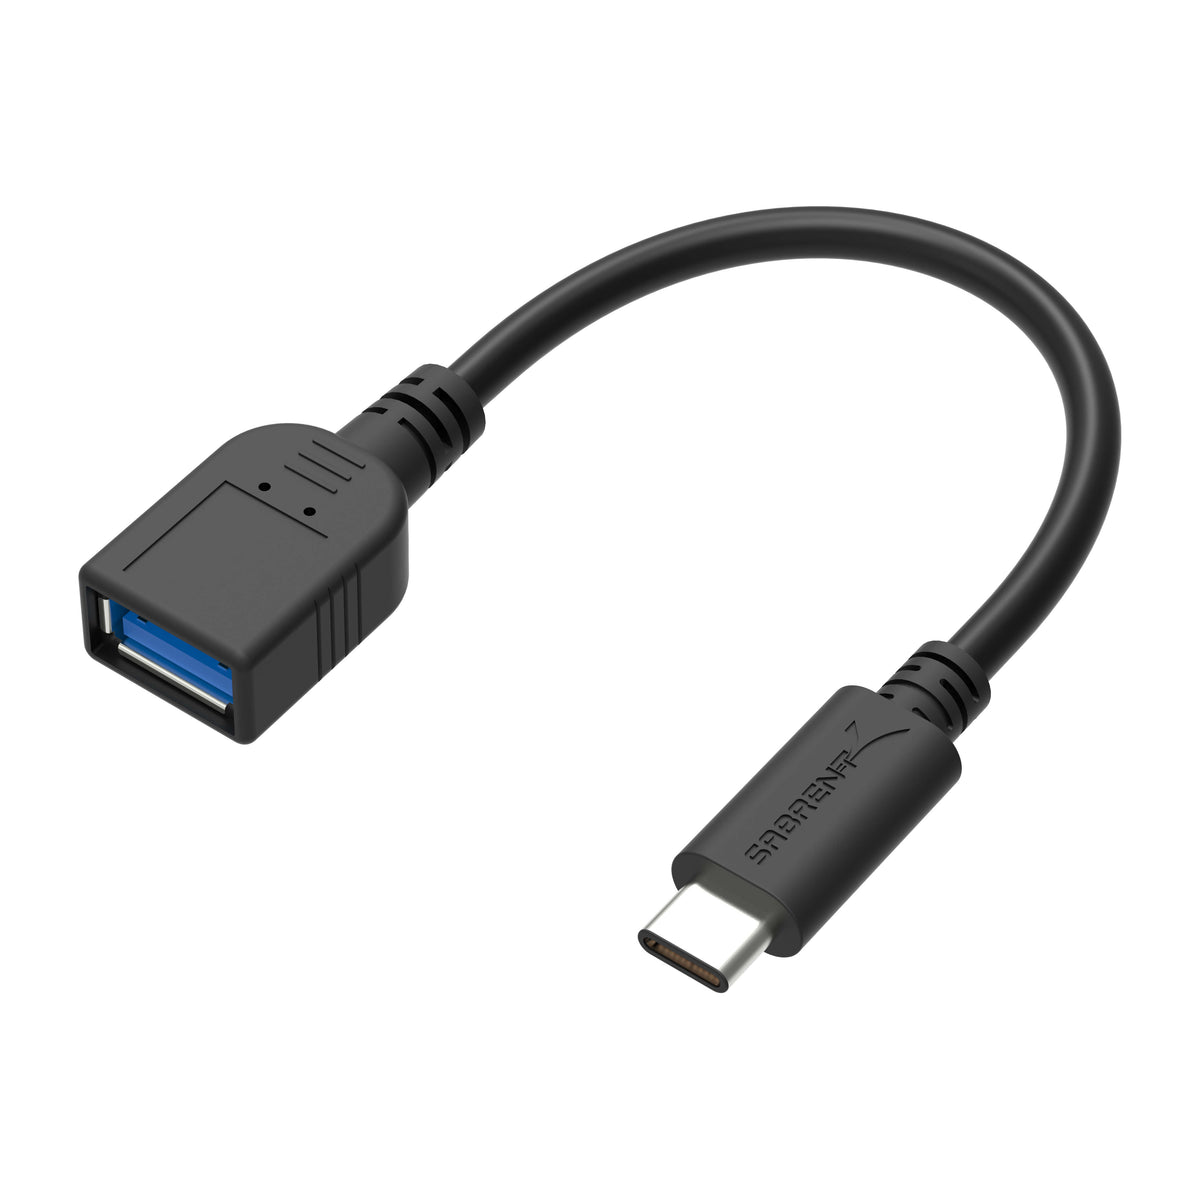 USB-C to USB-A Adapter for USB Type-C Devices